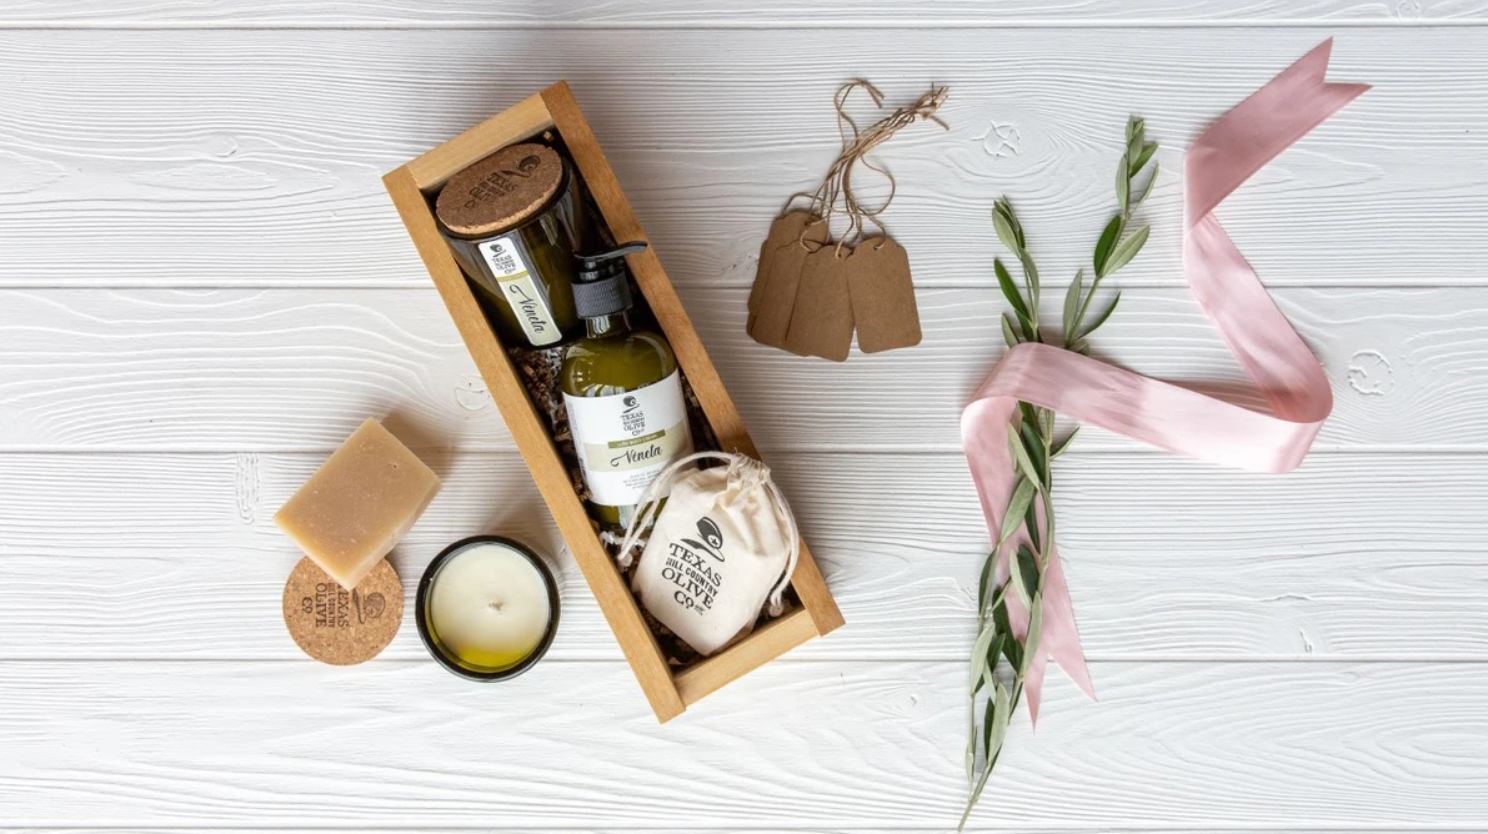 Texas Olive Oil As A Gift